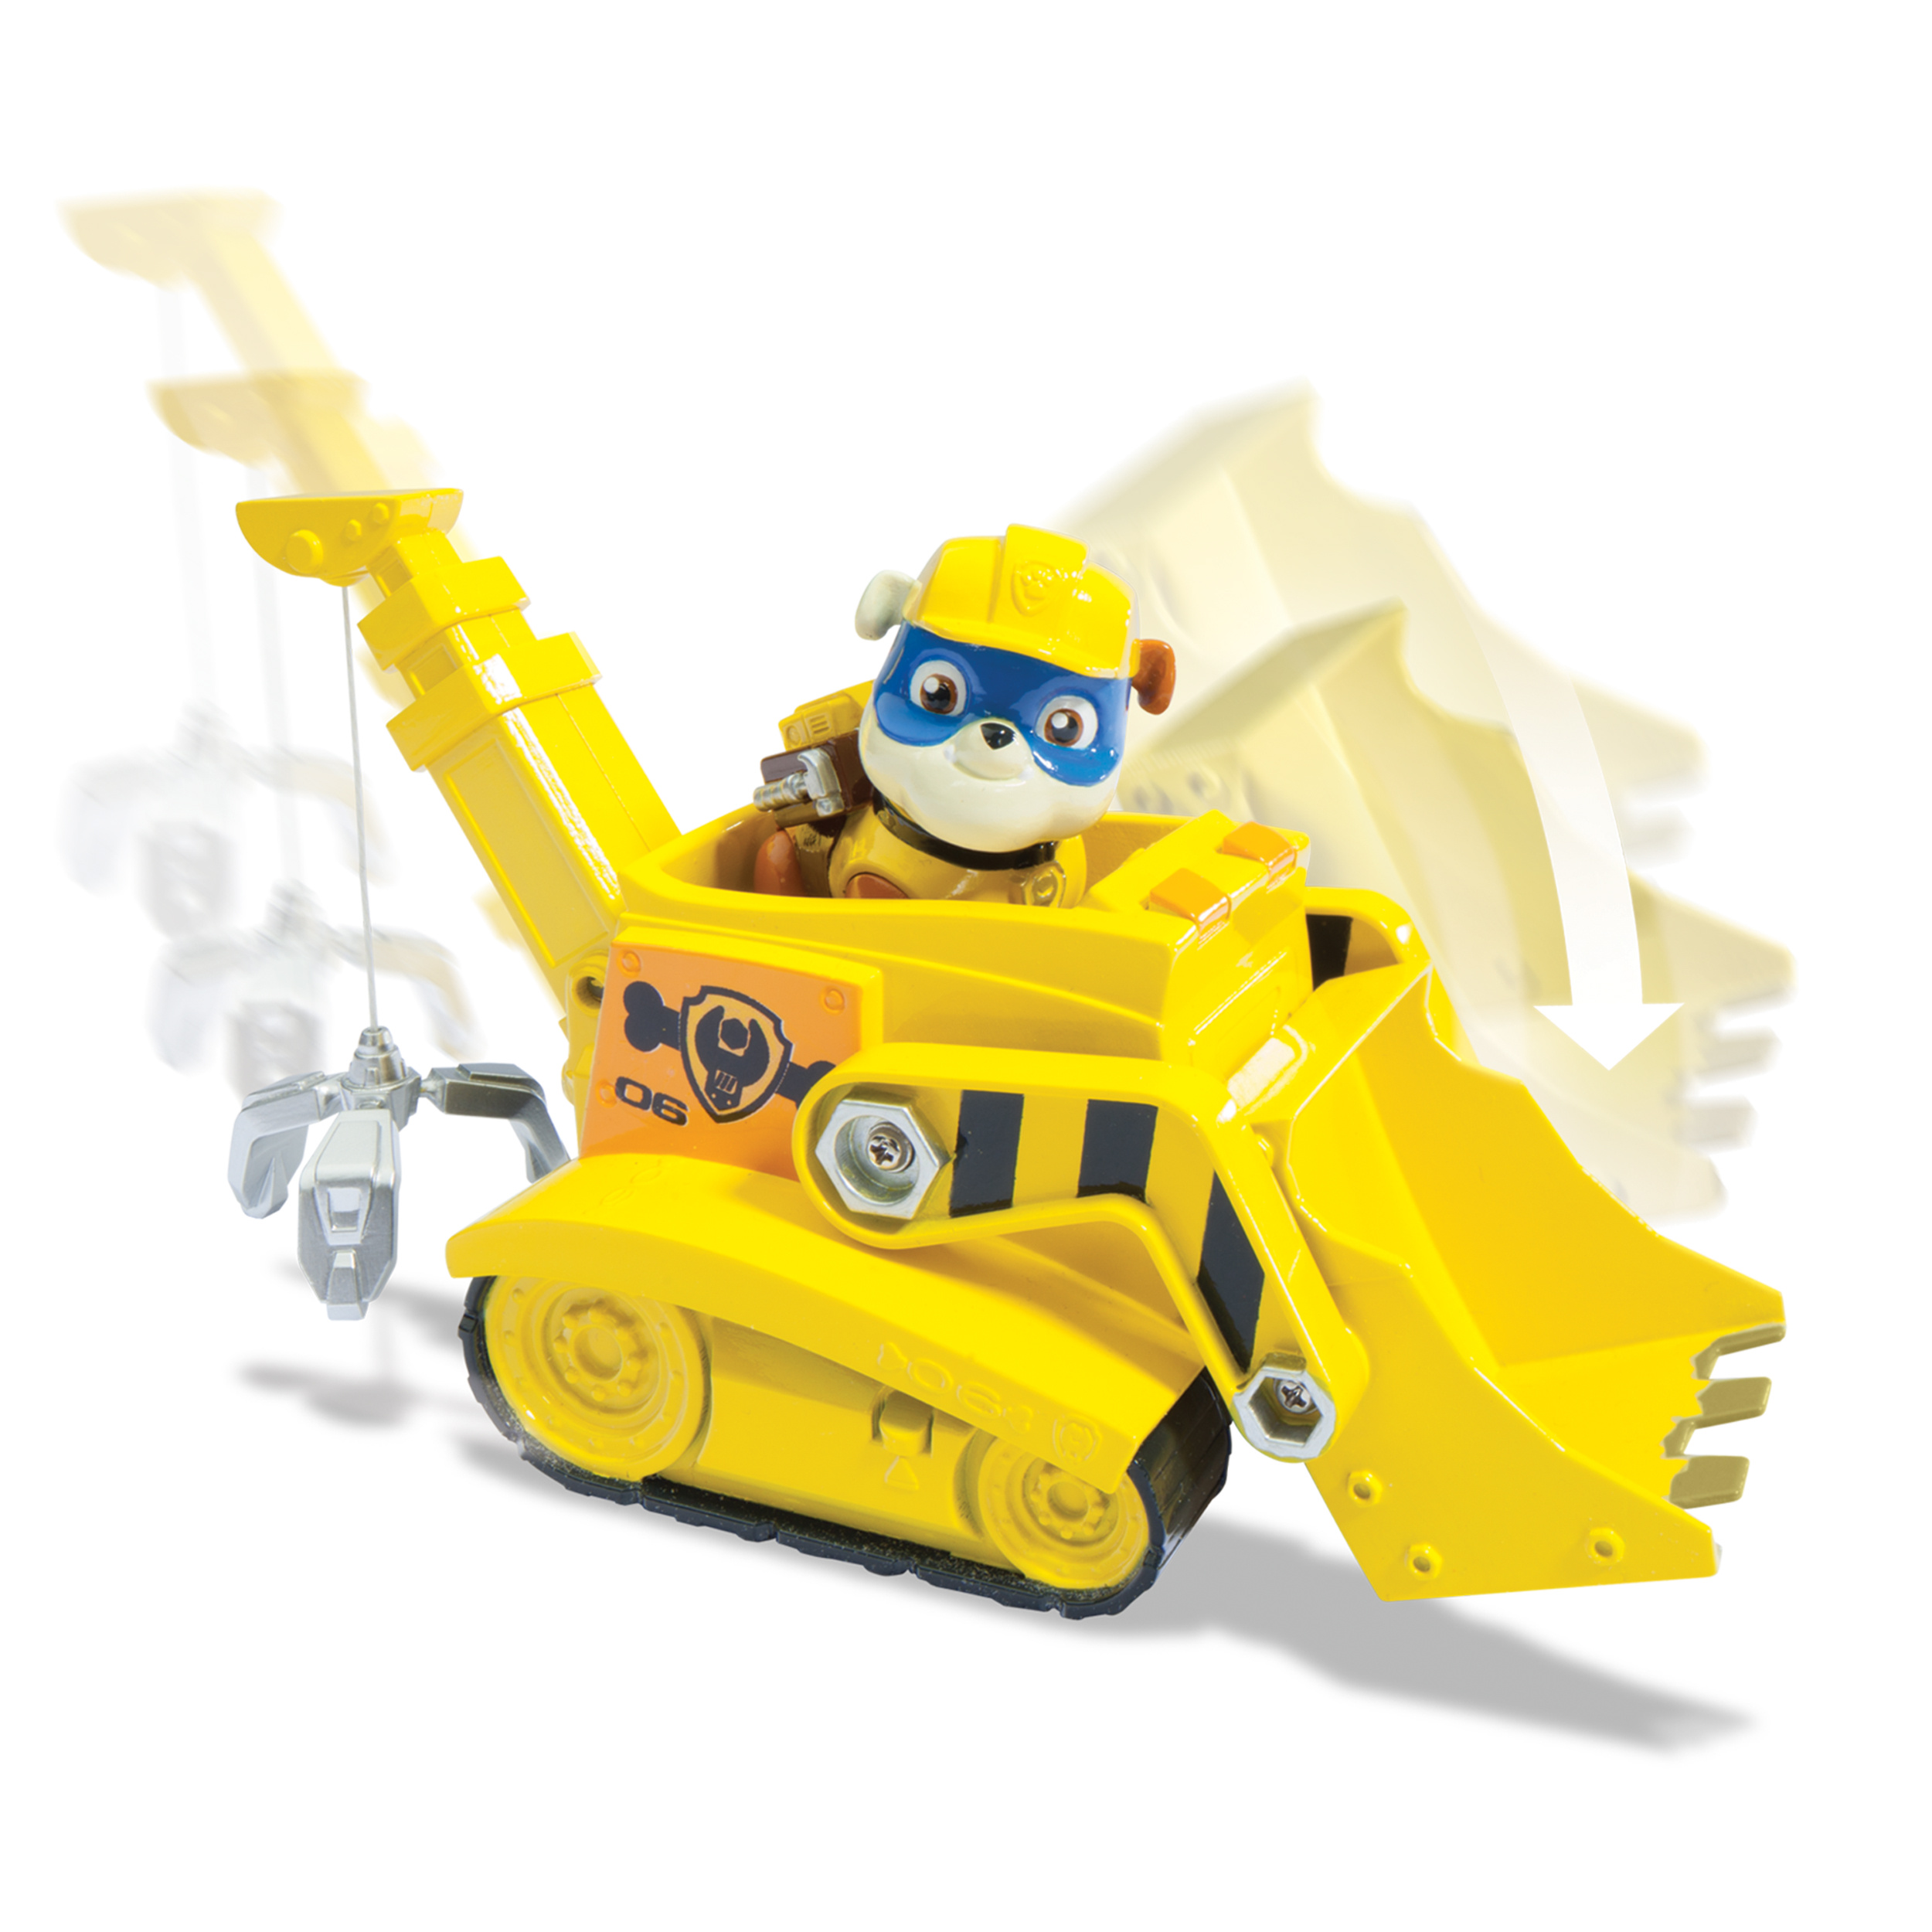 Paw Patrol Super Pup Rubble's Crane, Vehicle and Figure - image 3 of 6